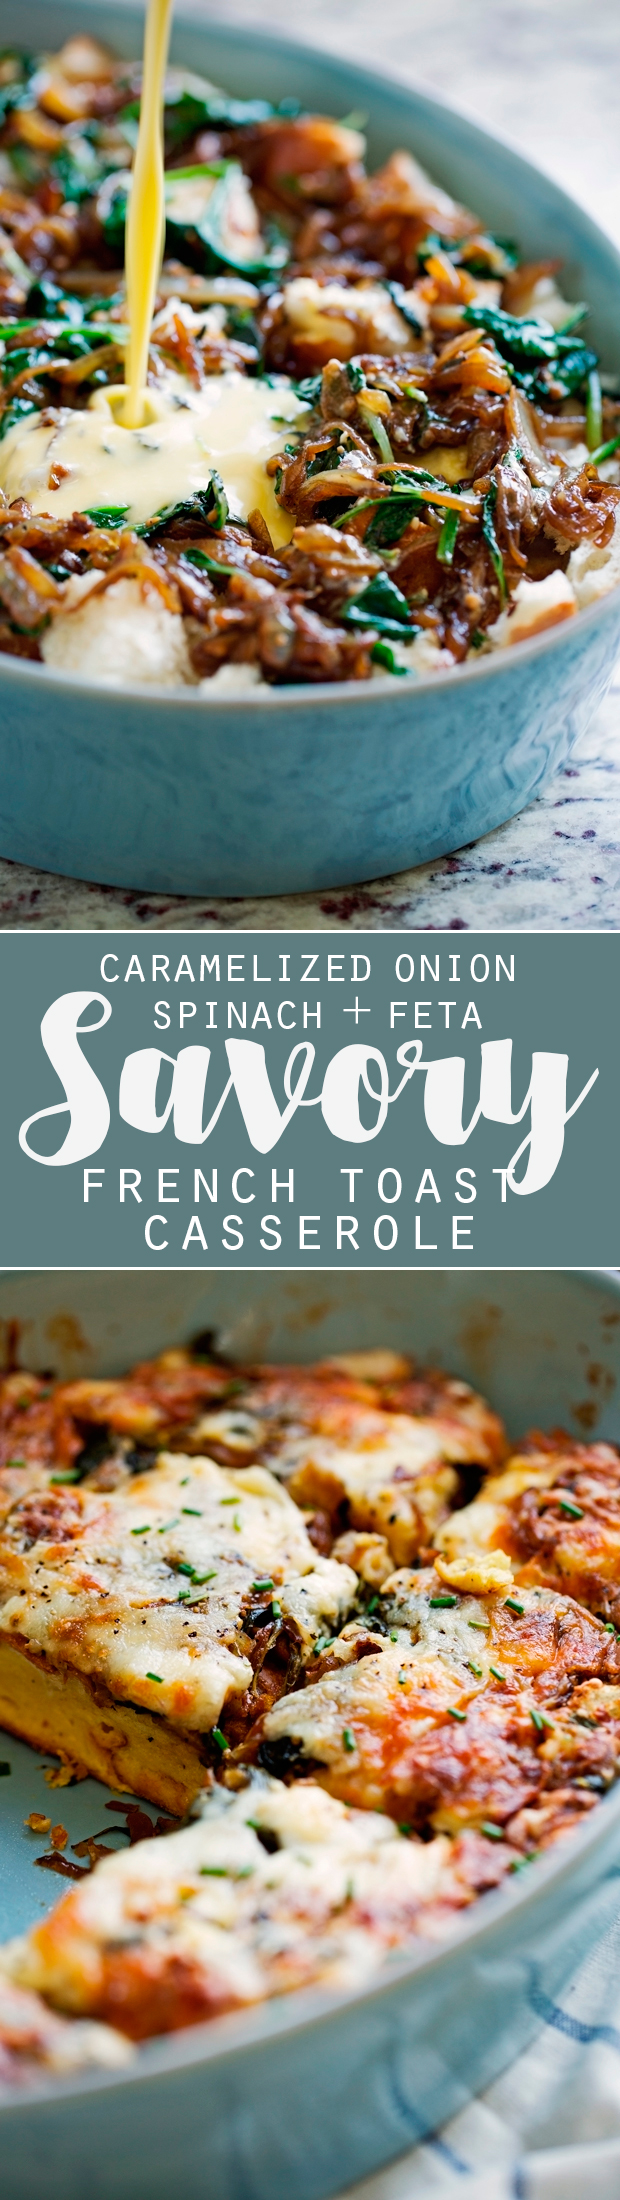 Caramelized Onion Spinach Feta Savory French Toast Casserole - The perfect casserole to make ahead and bake off in the morning. Hearty and delicious! #casserole #frenchtoastcasserole #breakfastcasserole #savoryfrenchtoast | Littlespicejar.com